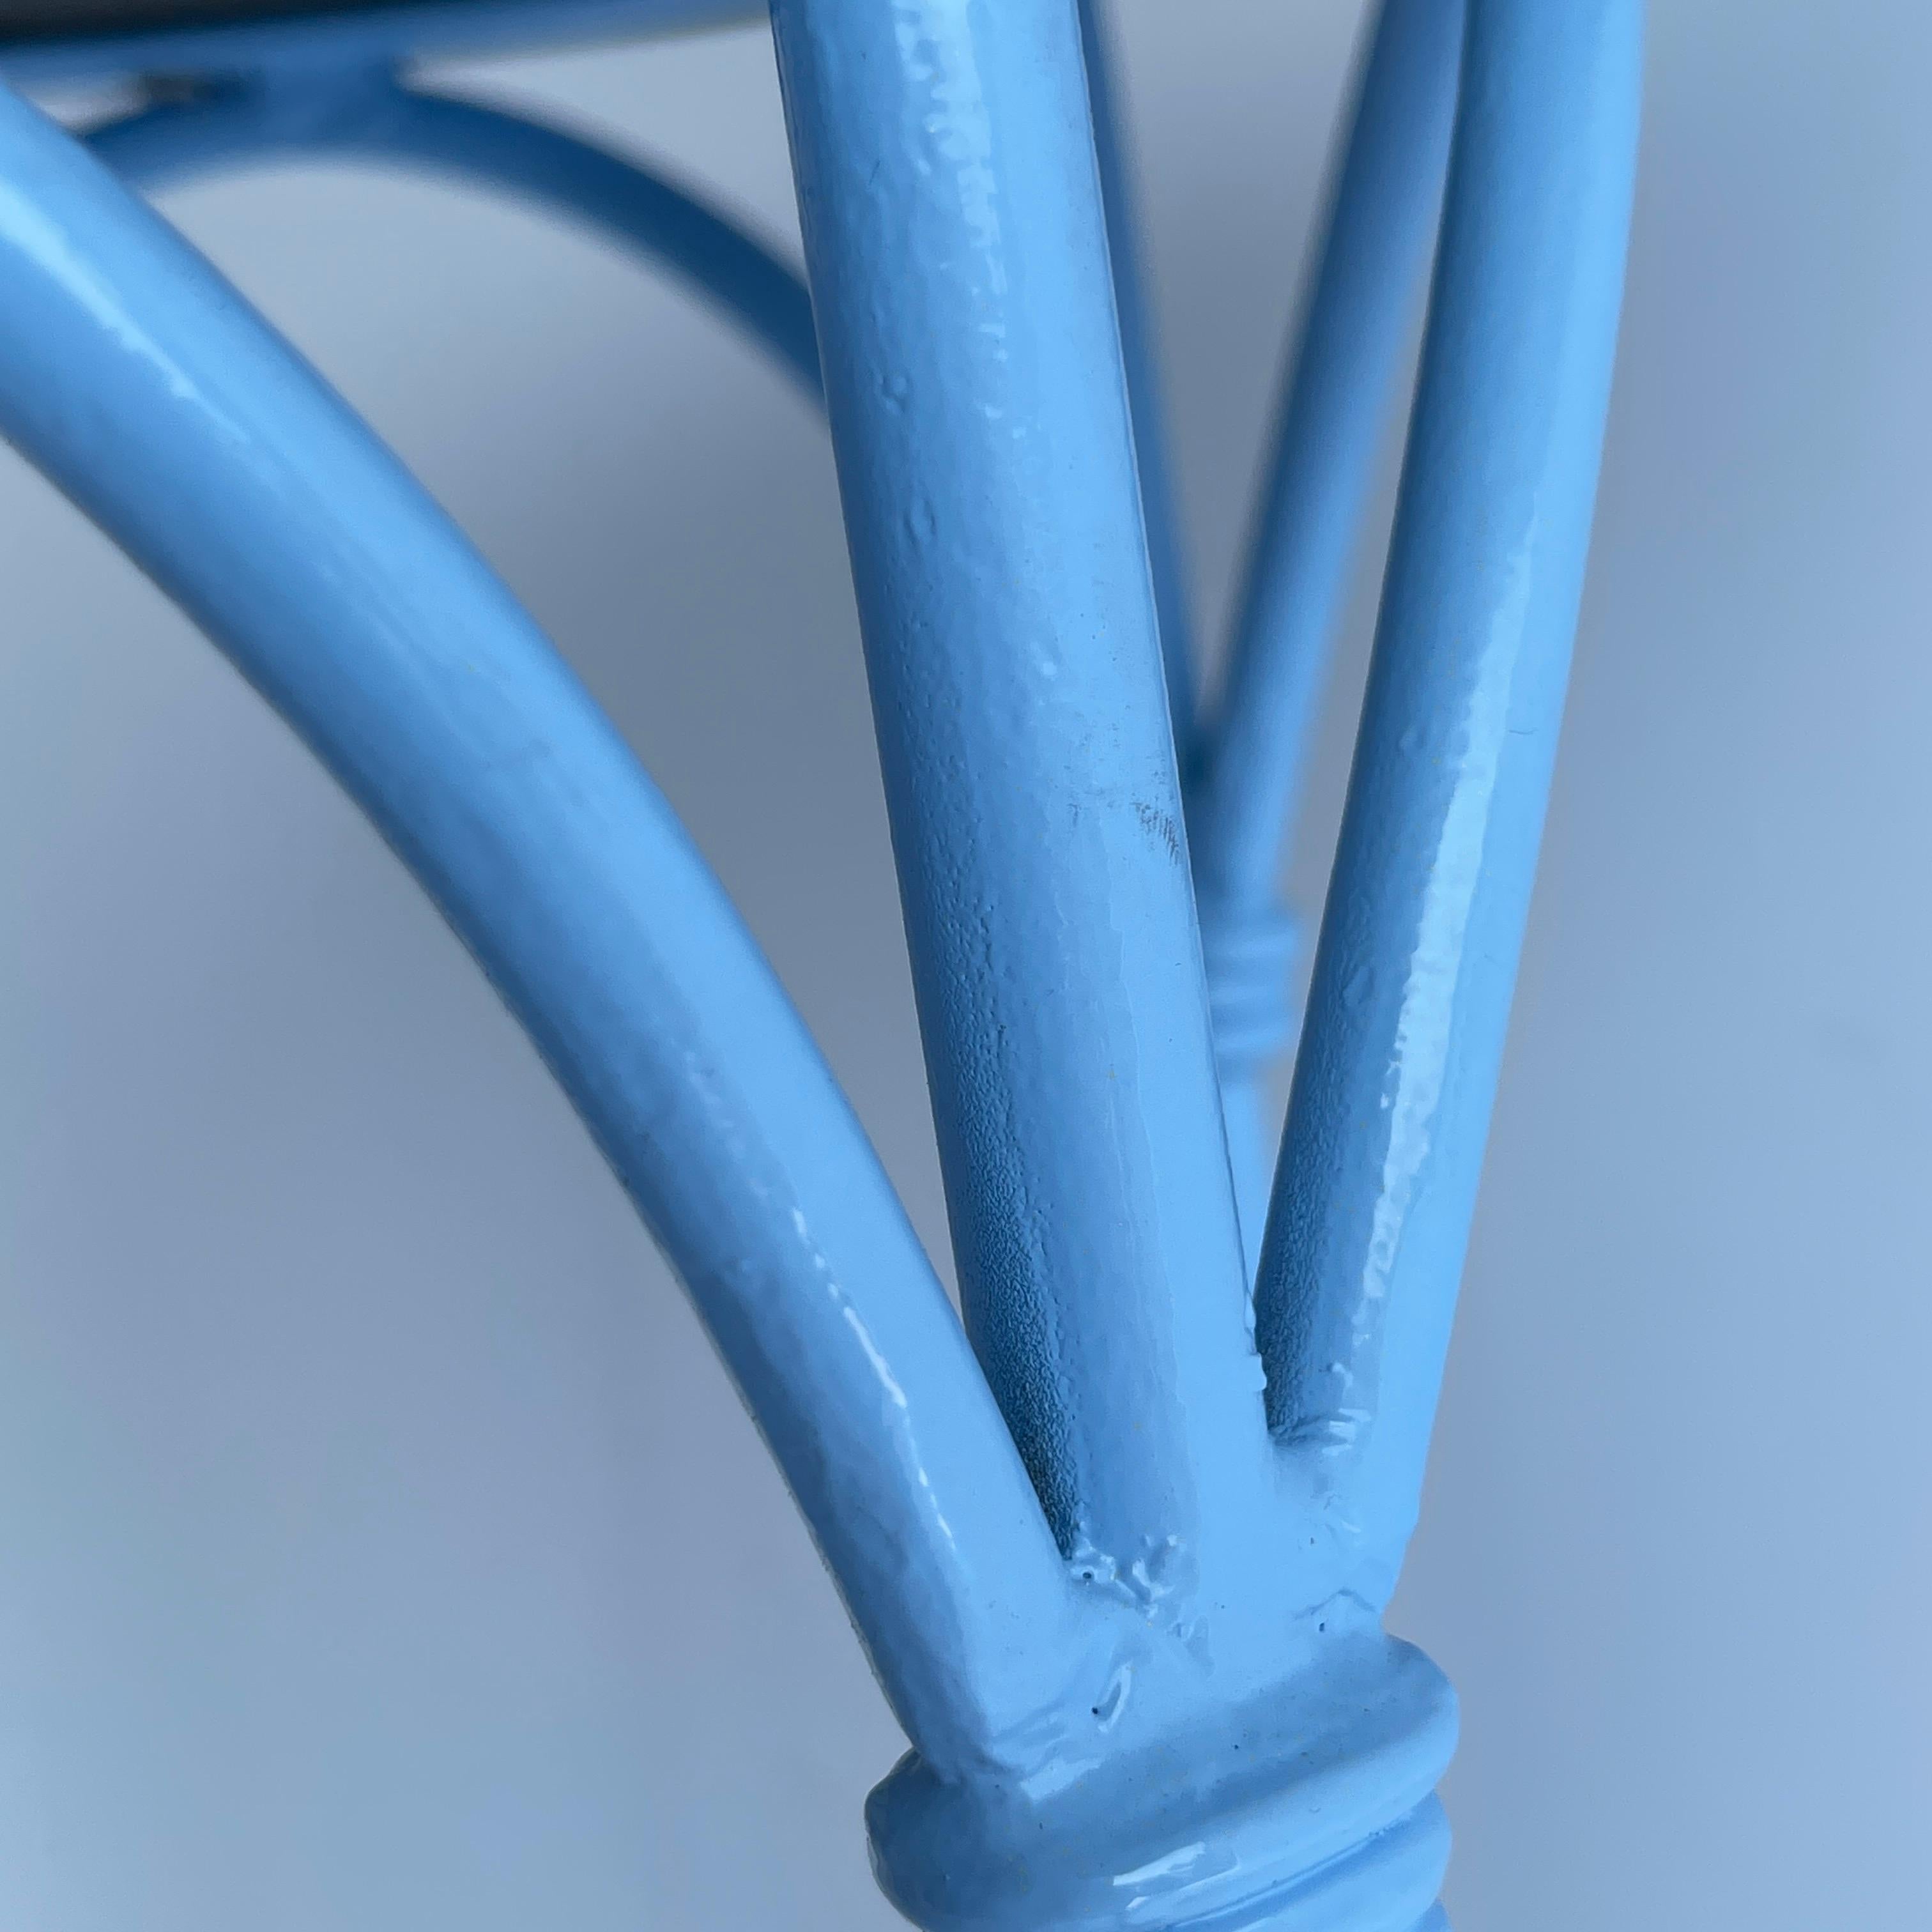 Three Blue Barstools with Leather Seats, Legs Powder Coated For Sale 2